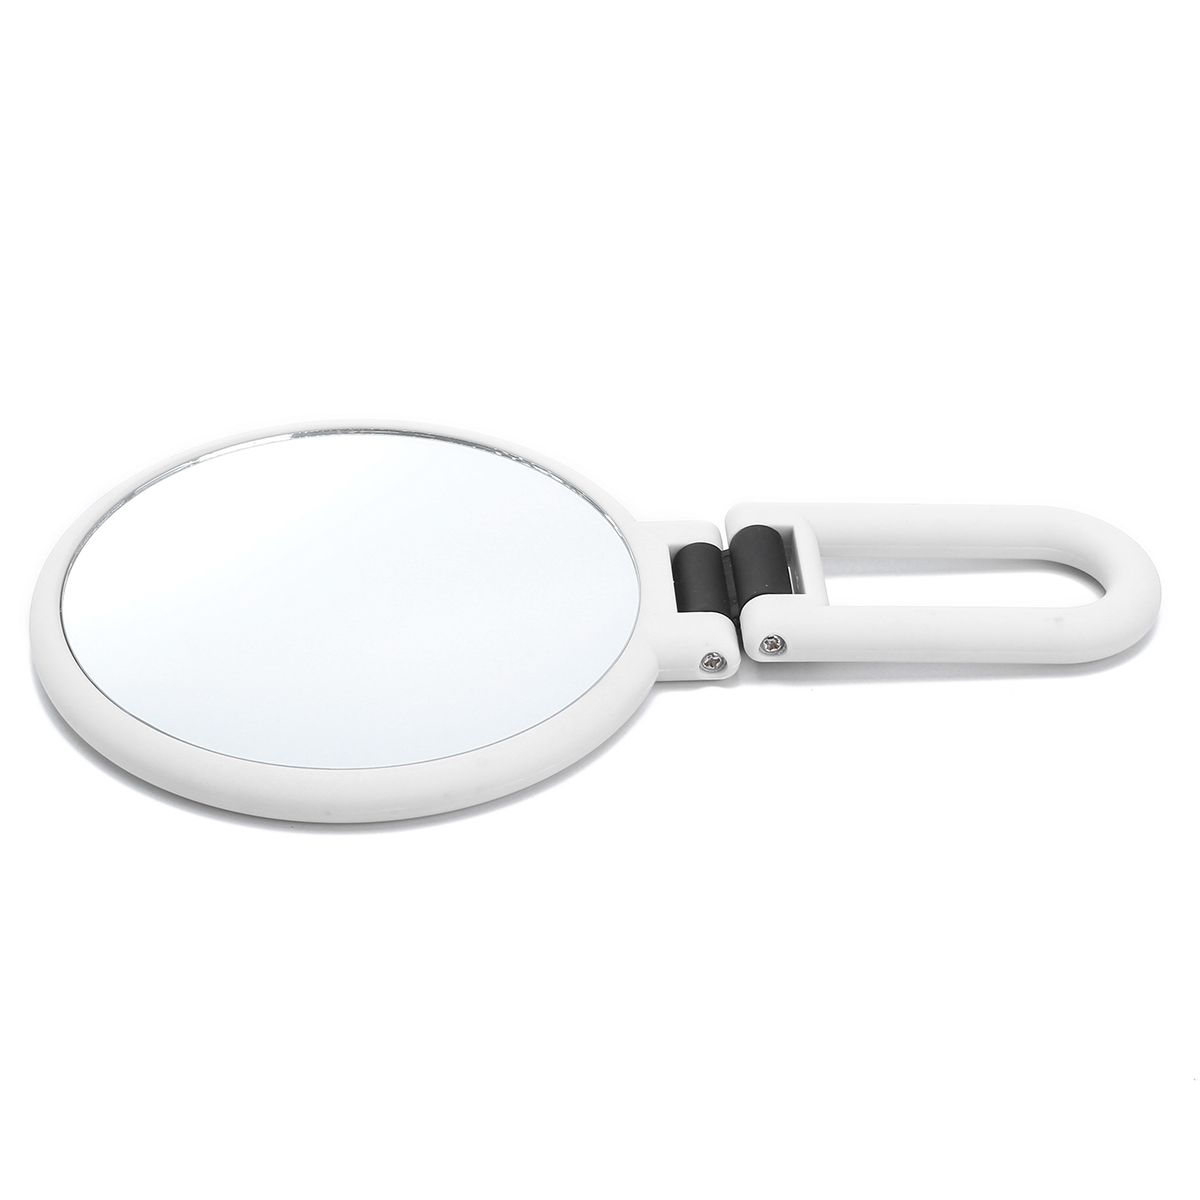 10x-Magnification-Adjustable-Make-Up-Mirrors-Double-Sided-Vanity-Folding-Mirror-Bathroom-Travel-1449164